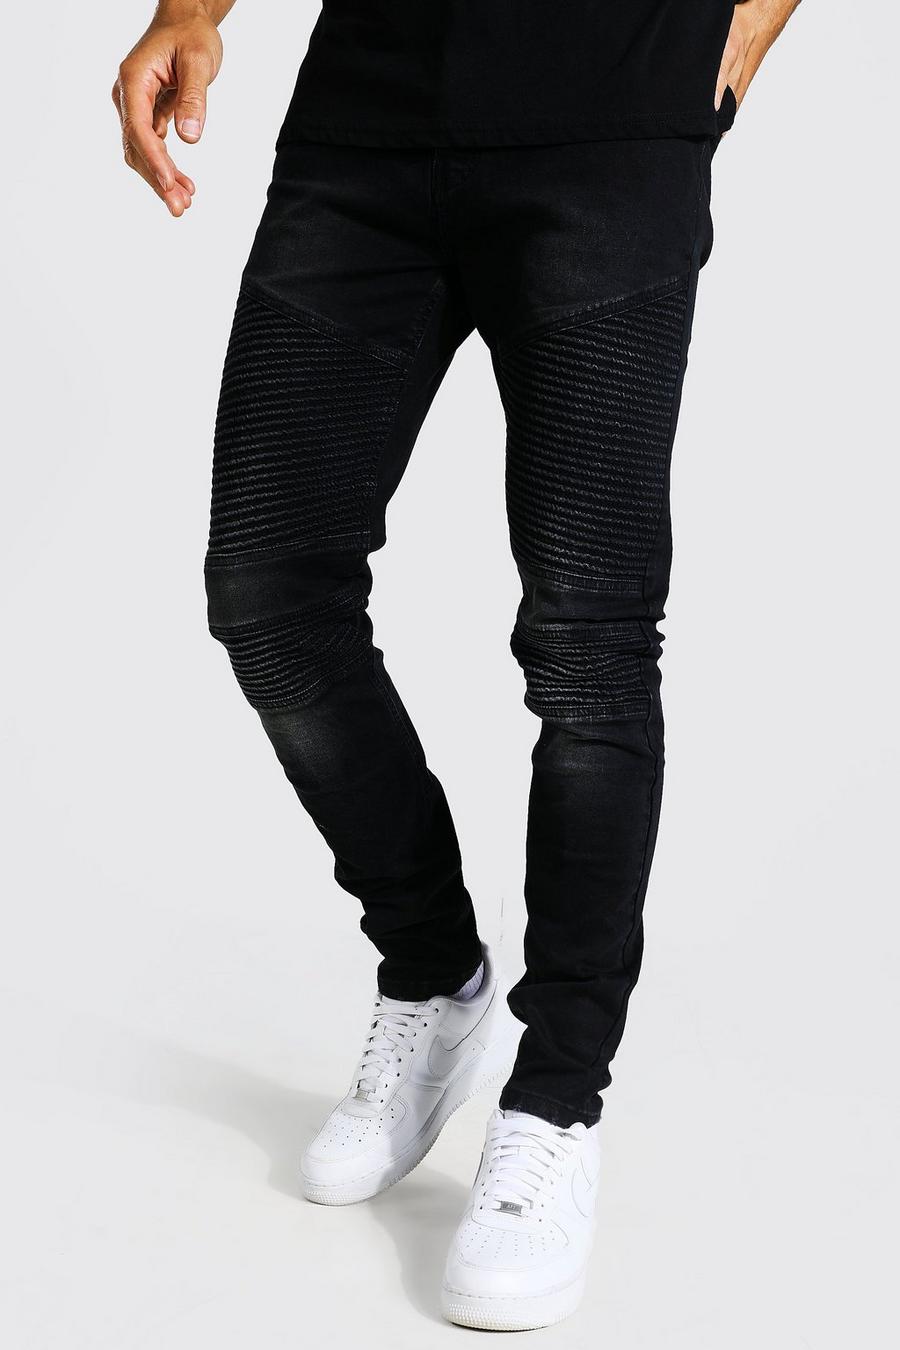 Jeans Tall stile Biker Skinny Fit Stretch con pannelli, Washed black image number 1